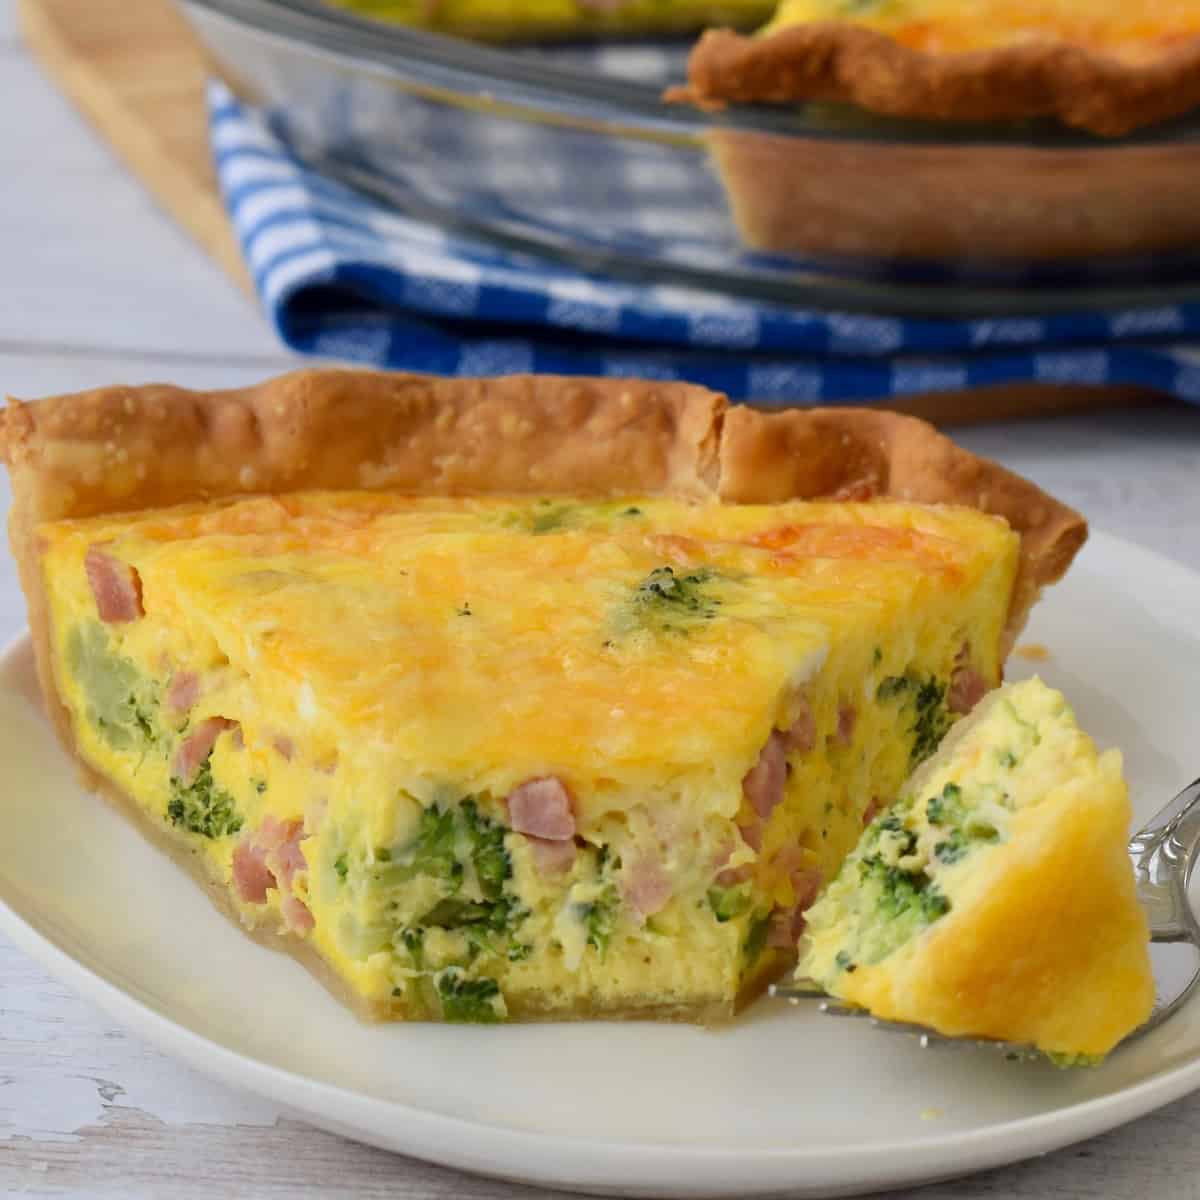 Slice of ham broccoli quiche on white plate with glass pie plate in background on blue cloth.